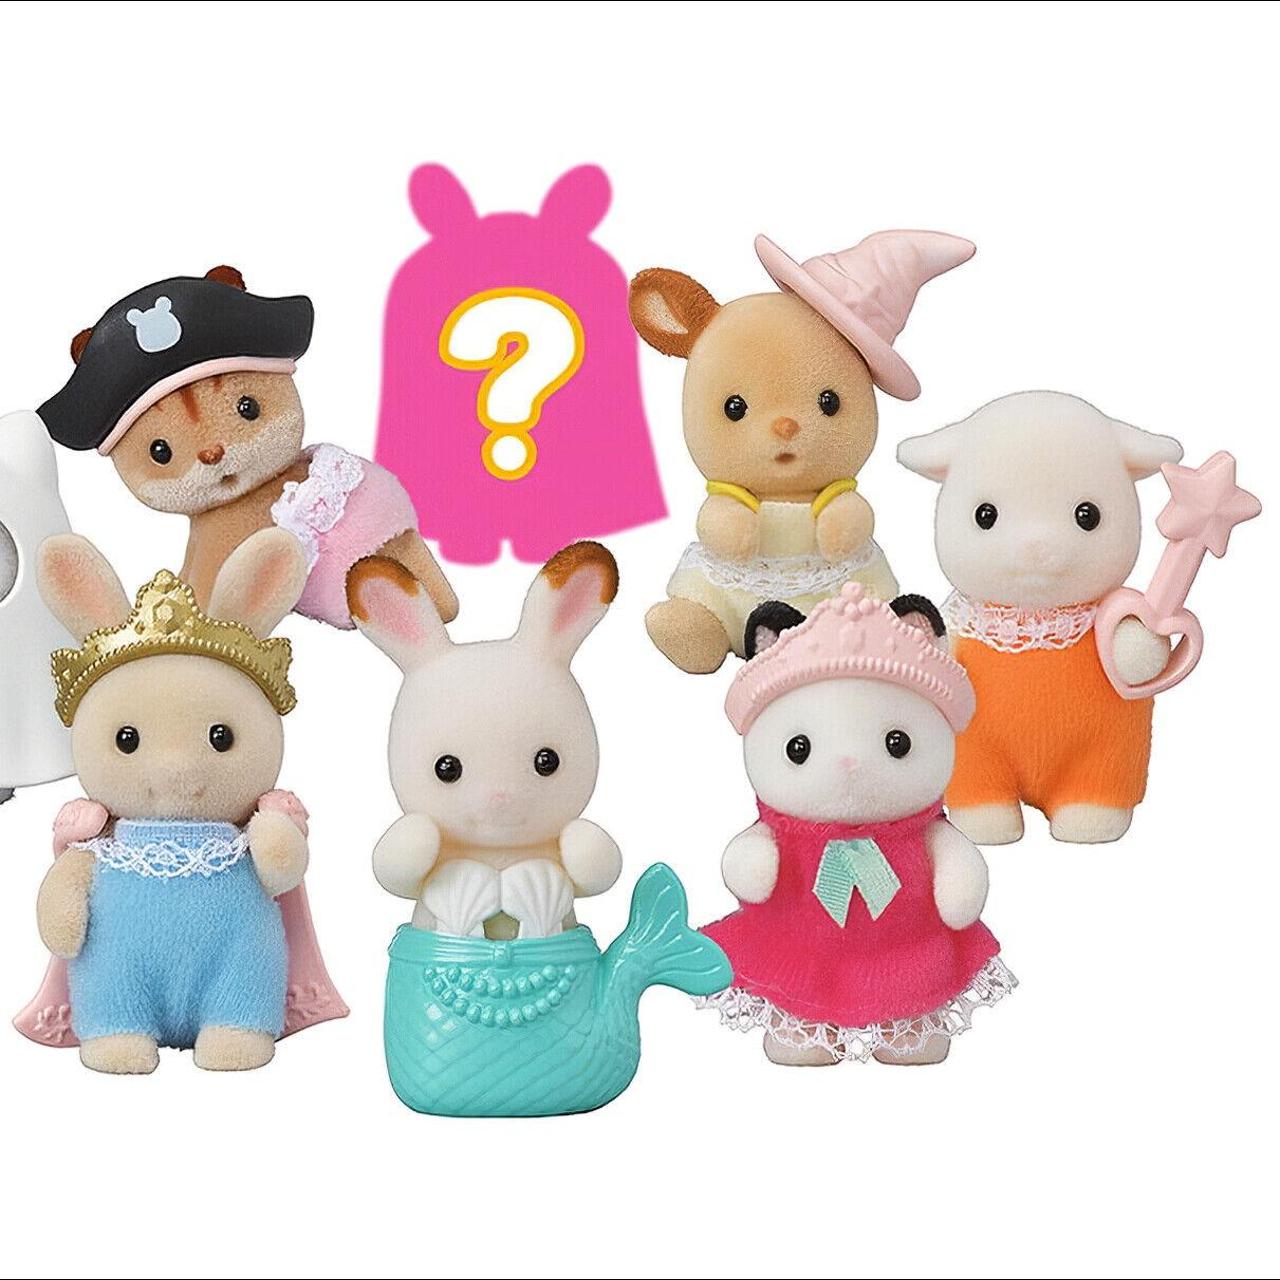 Sylvanian Families Calico Critters Baby Sweets Series Blind Bag for